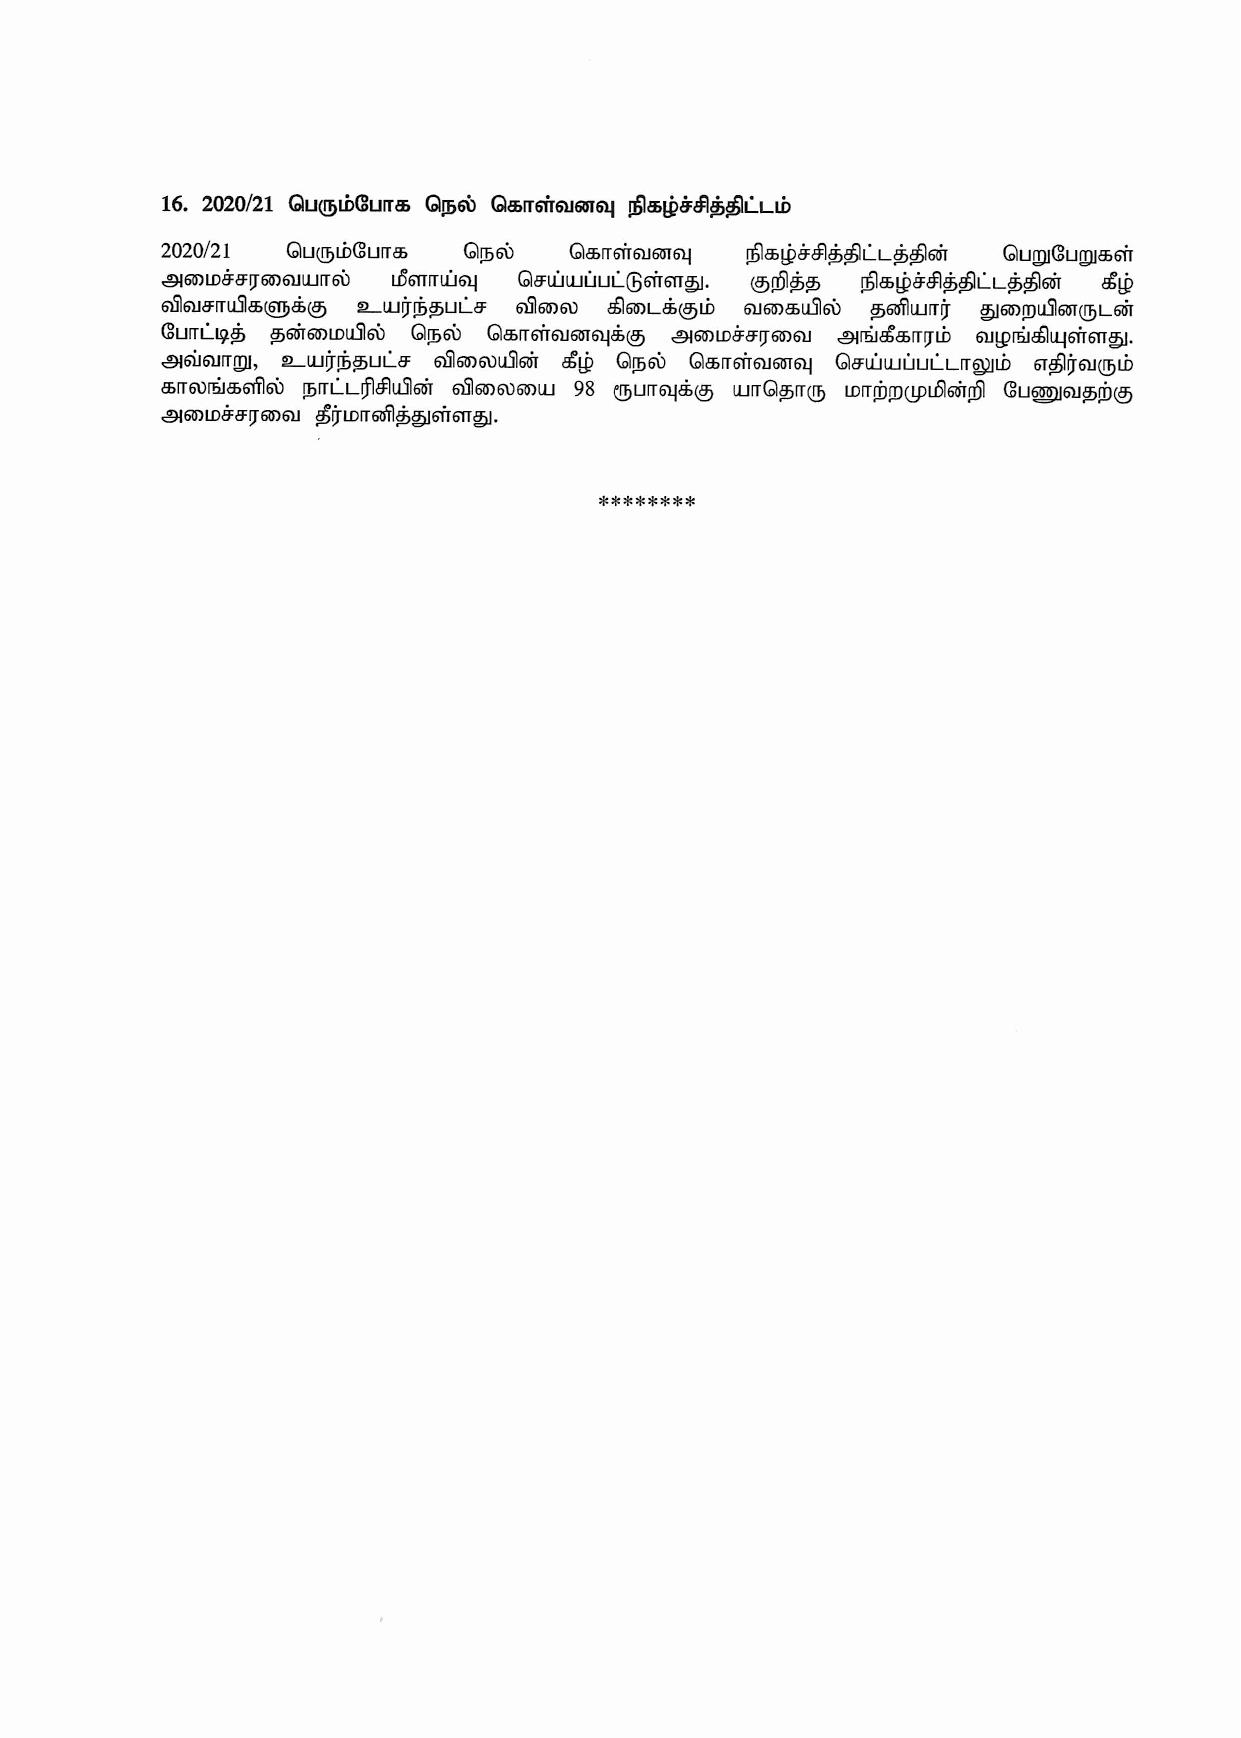 Cabinet Decision on 22.02.2021 Tamil page 005